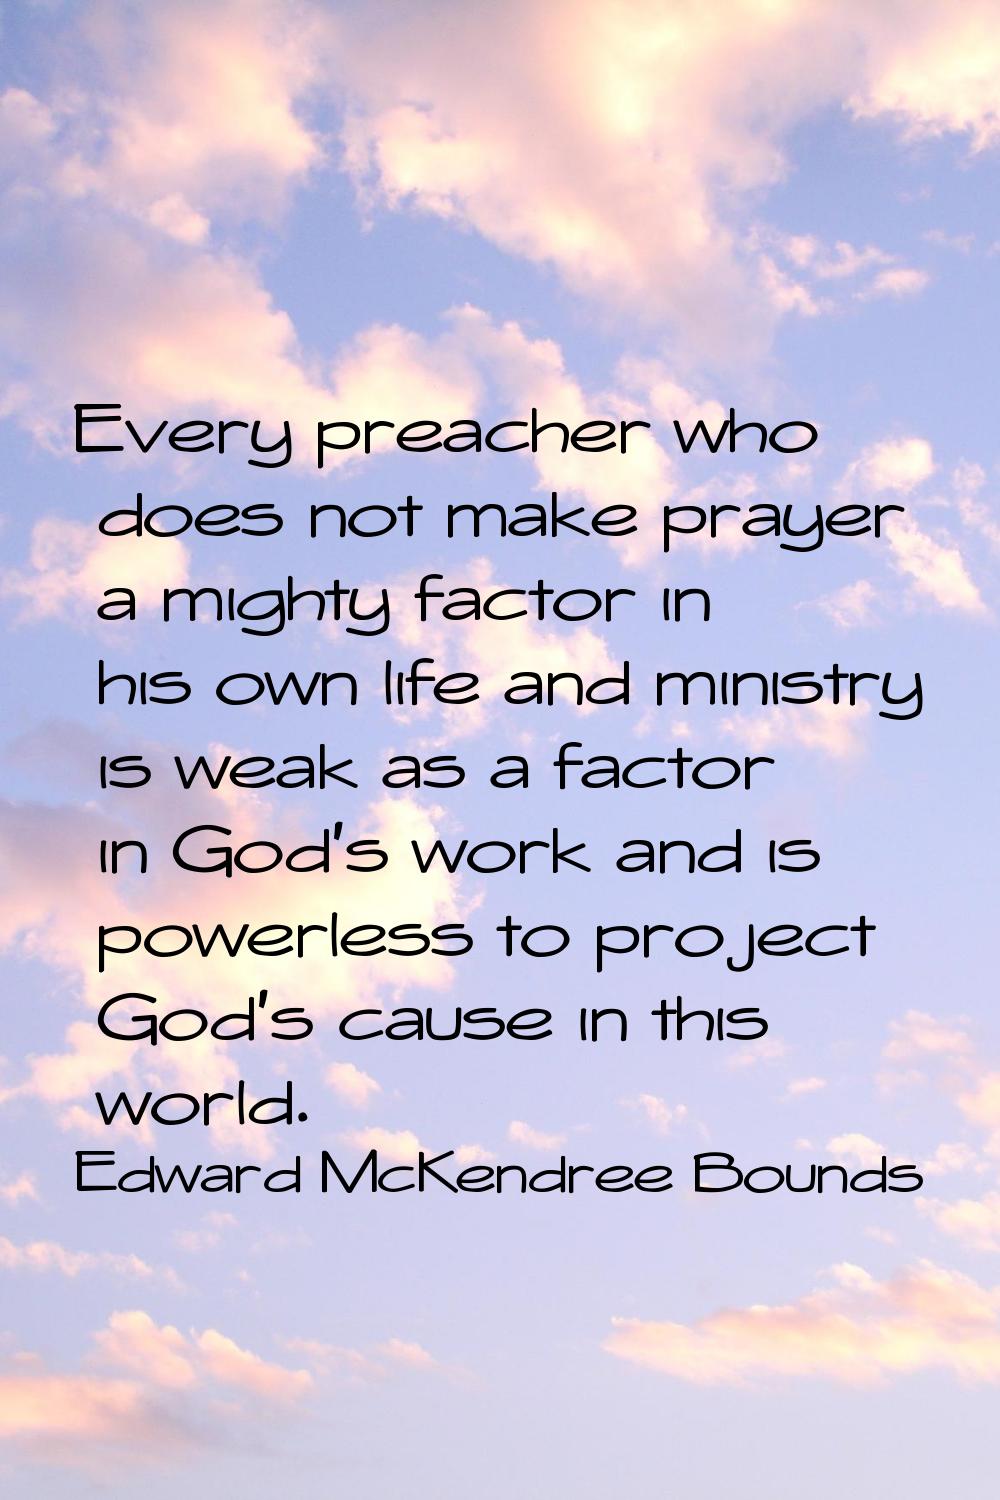 Every preacher who does not make prayer a mighty factor in his own life and ministry is weak as a f